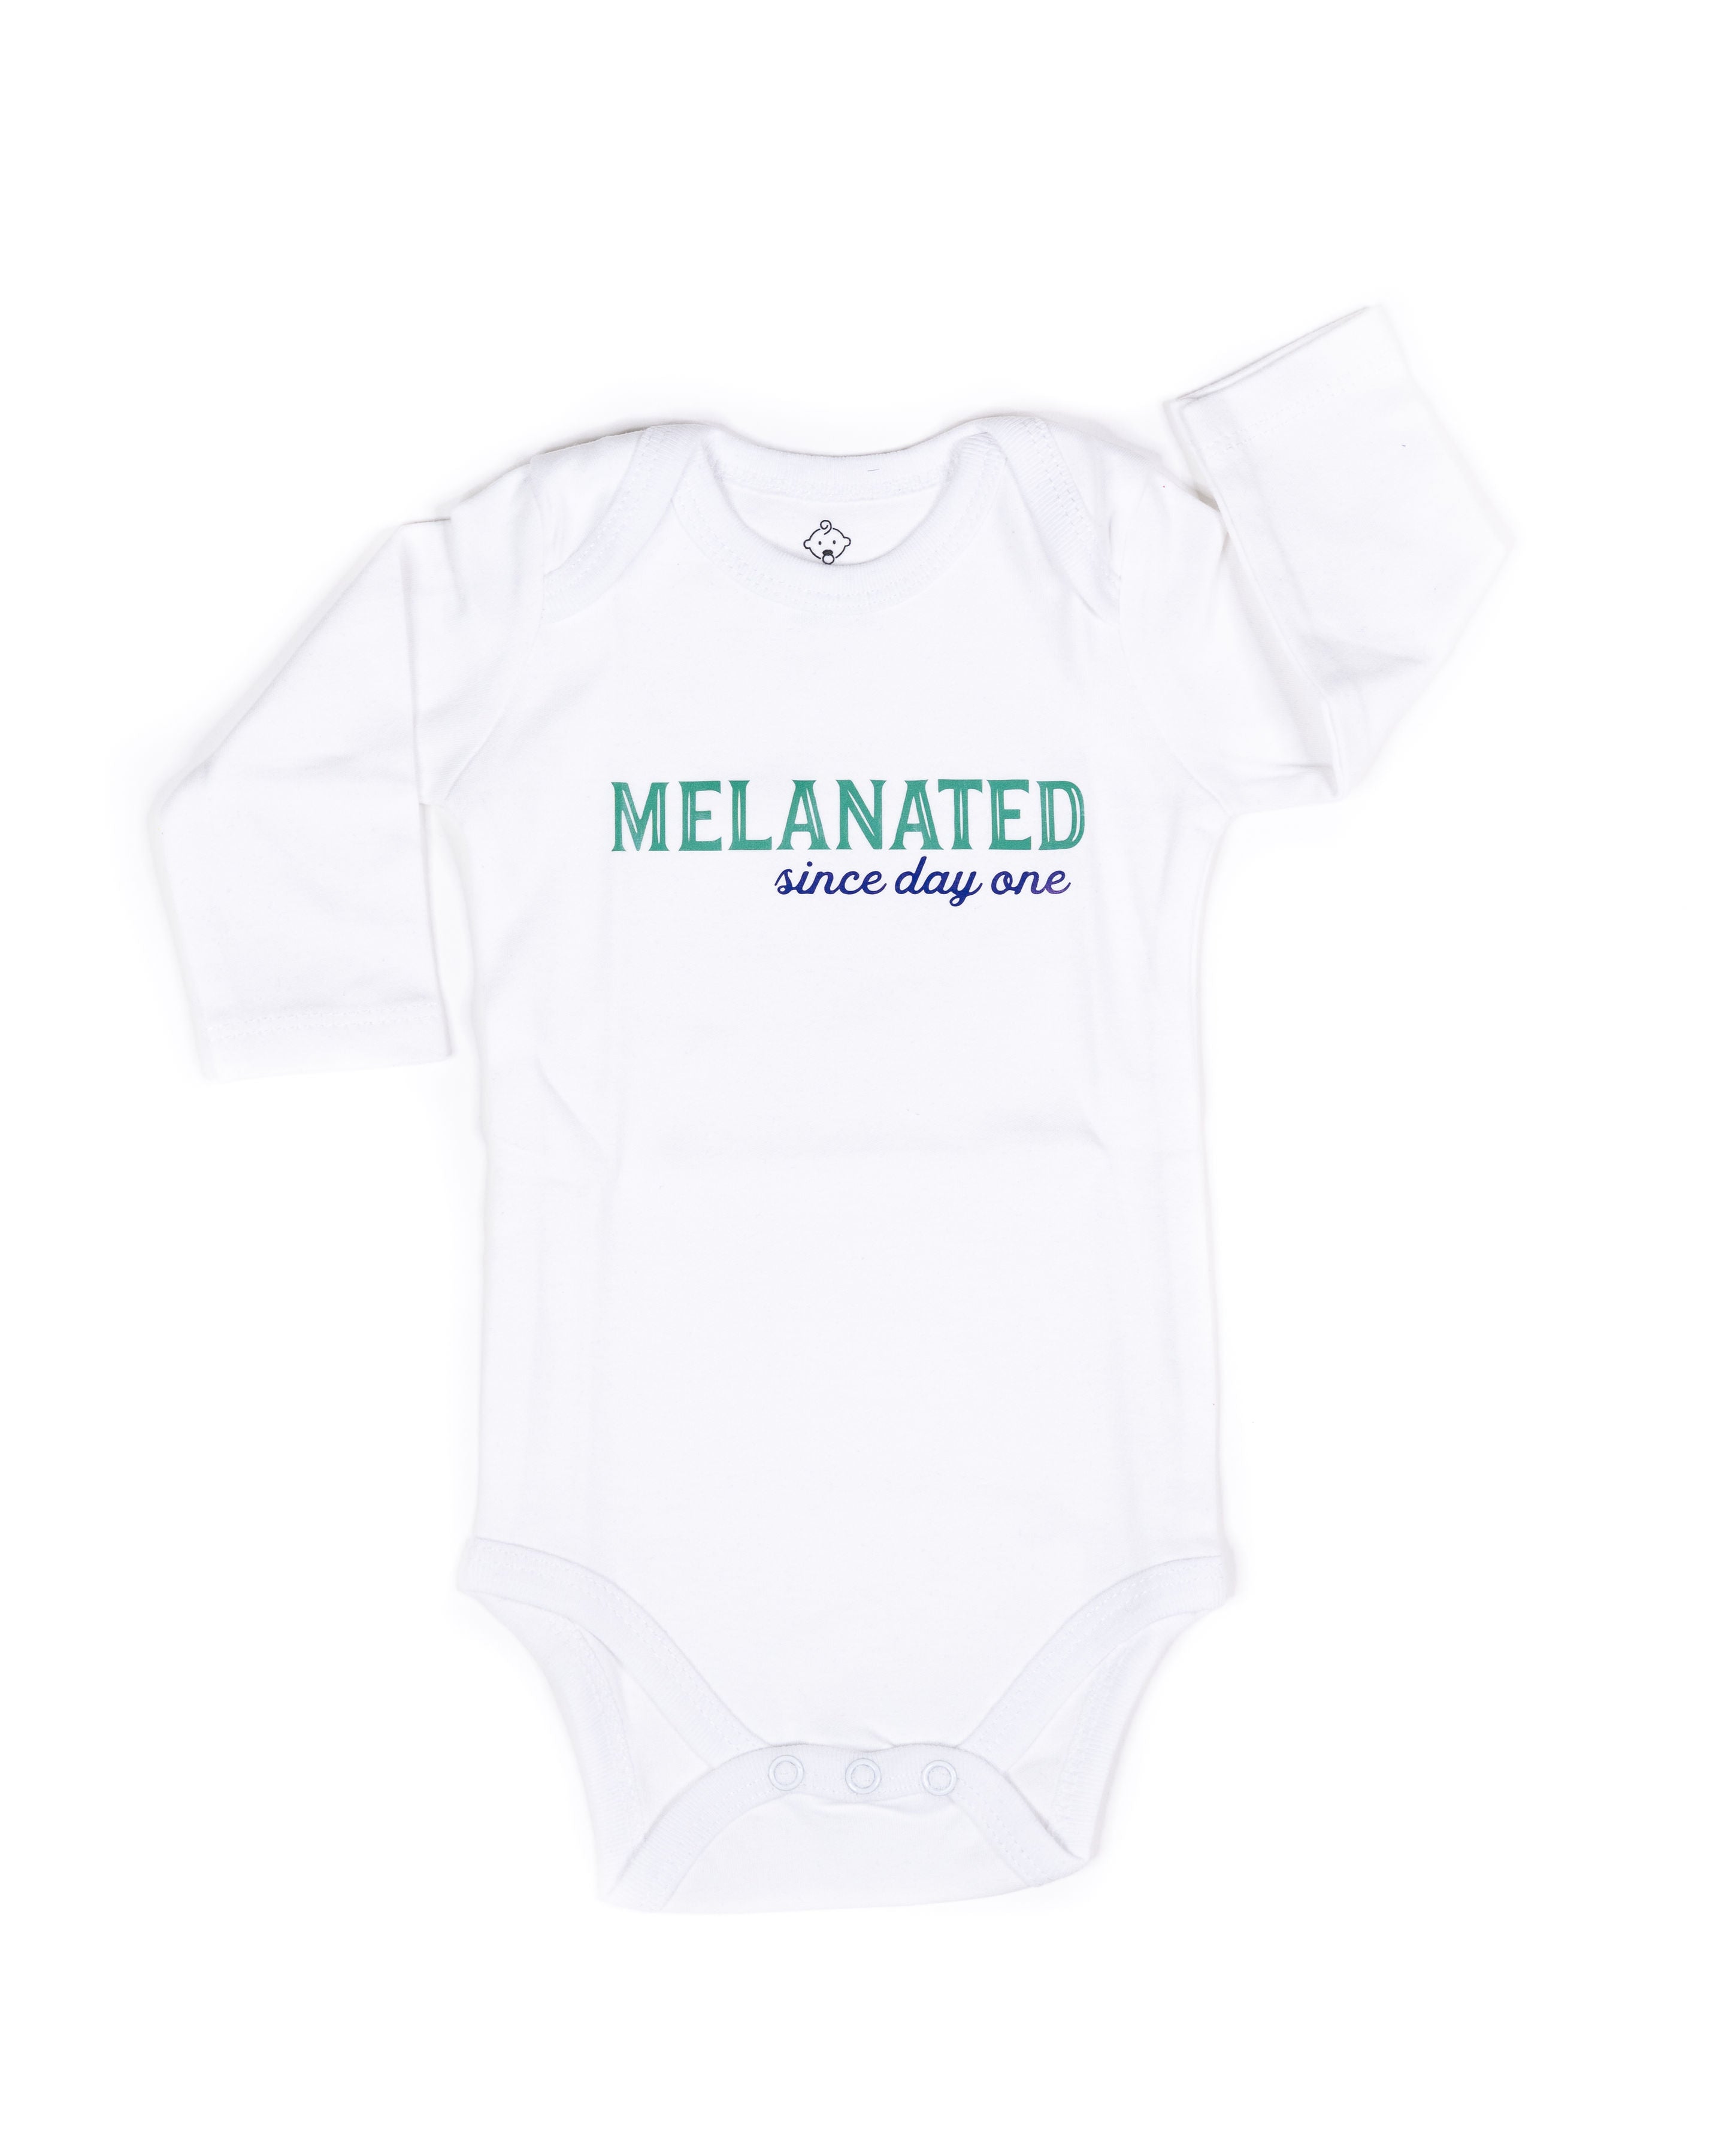 Melanated Since Day One long sleeve onesie